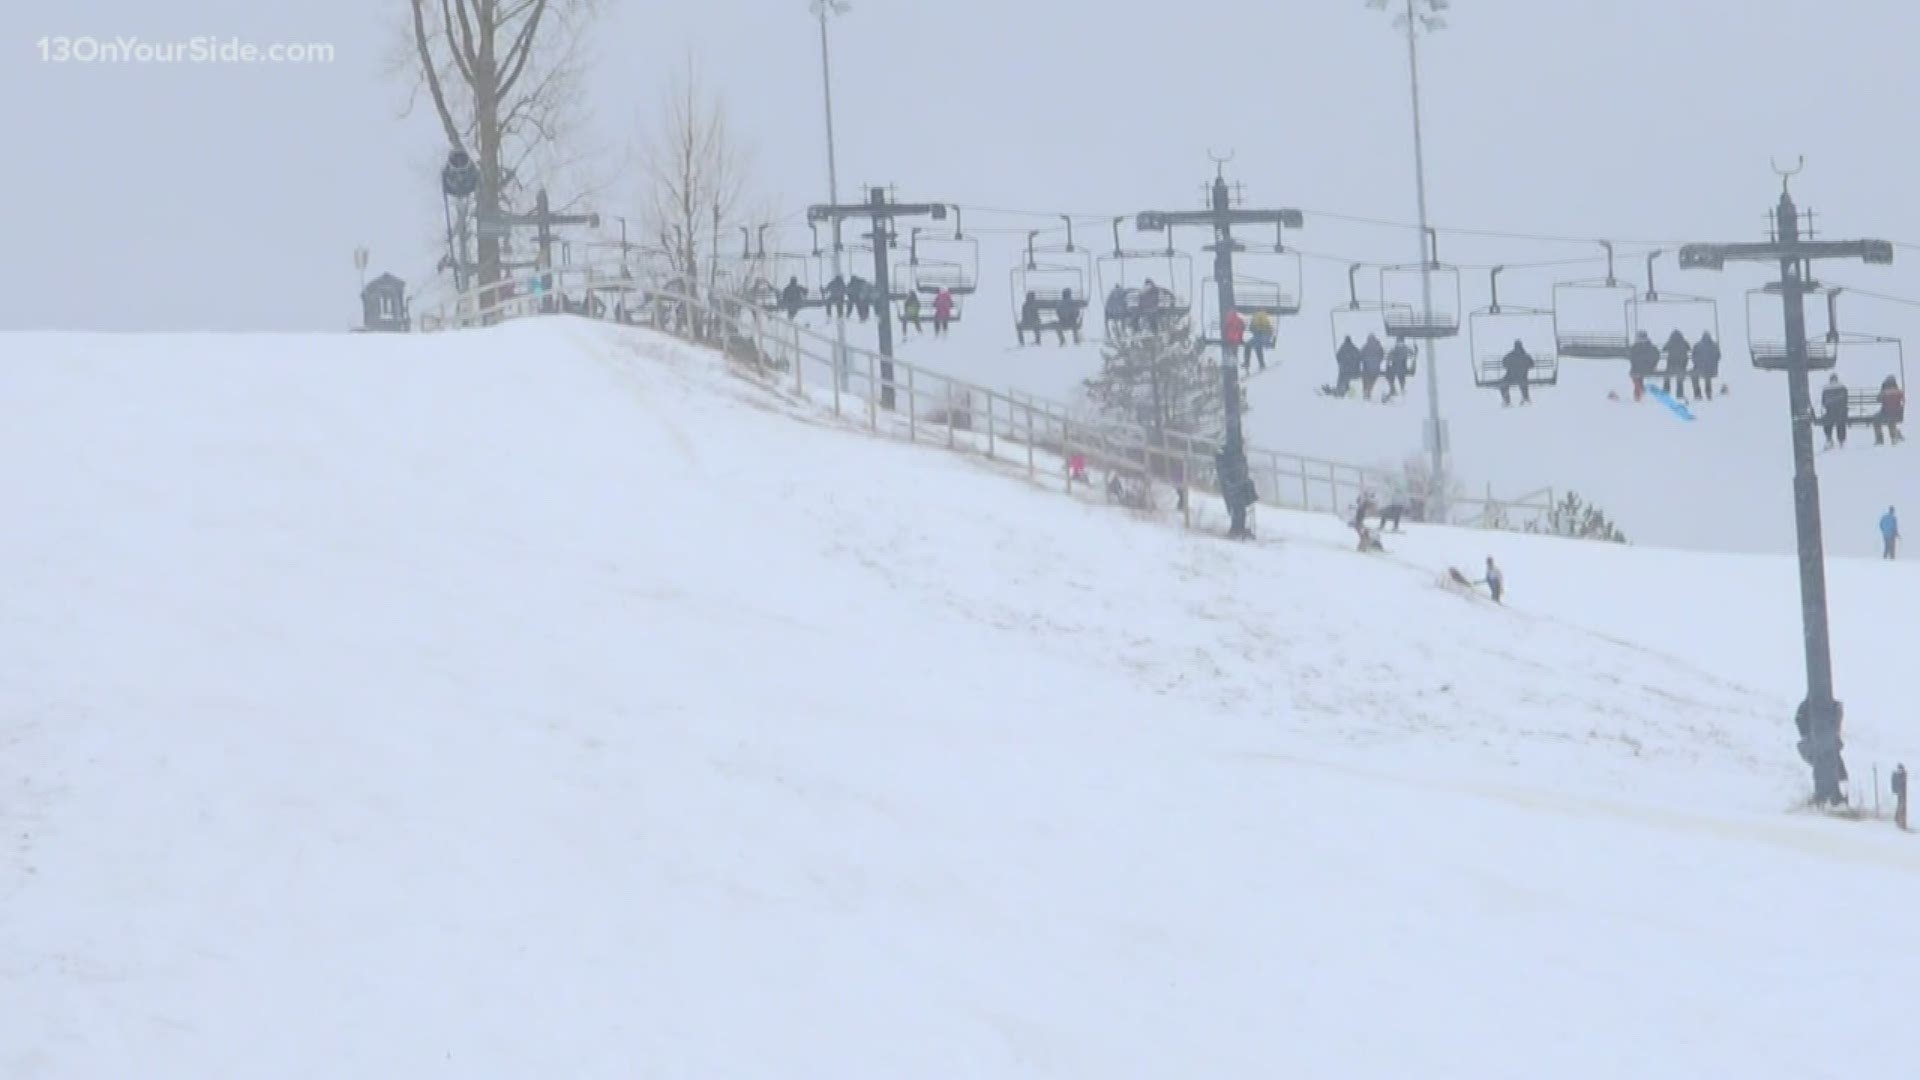 After a slow start to winter, Cannonsburg Ski Area celebrated the fresh powder that fell on New Year's Eve.